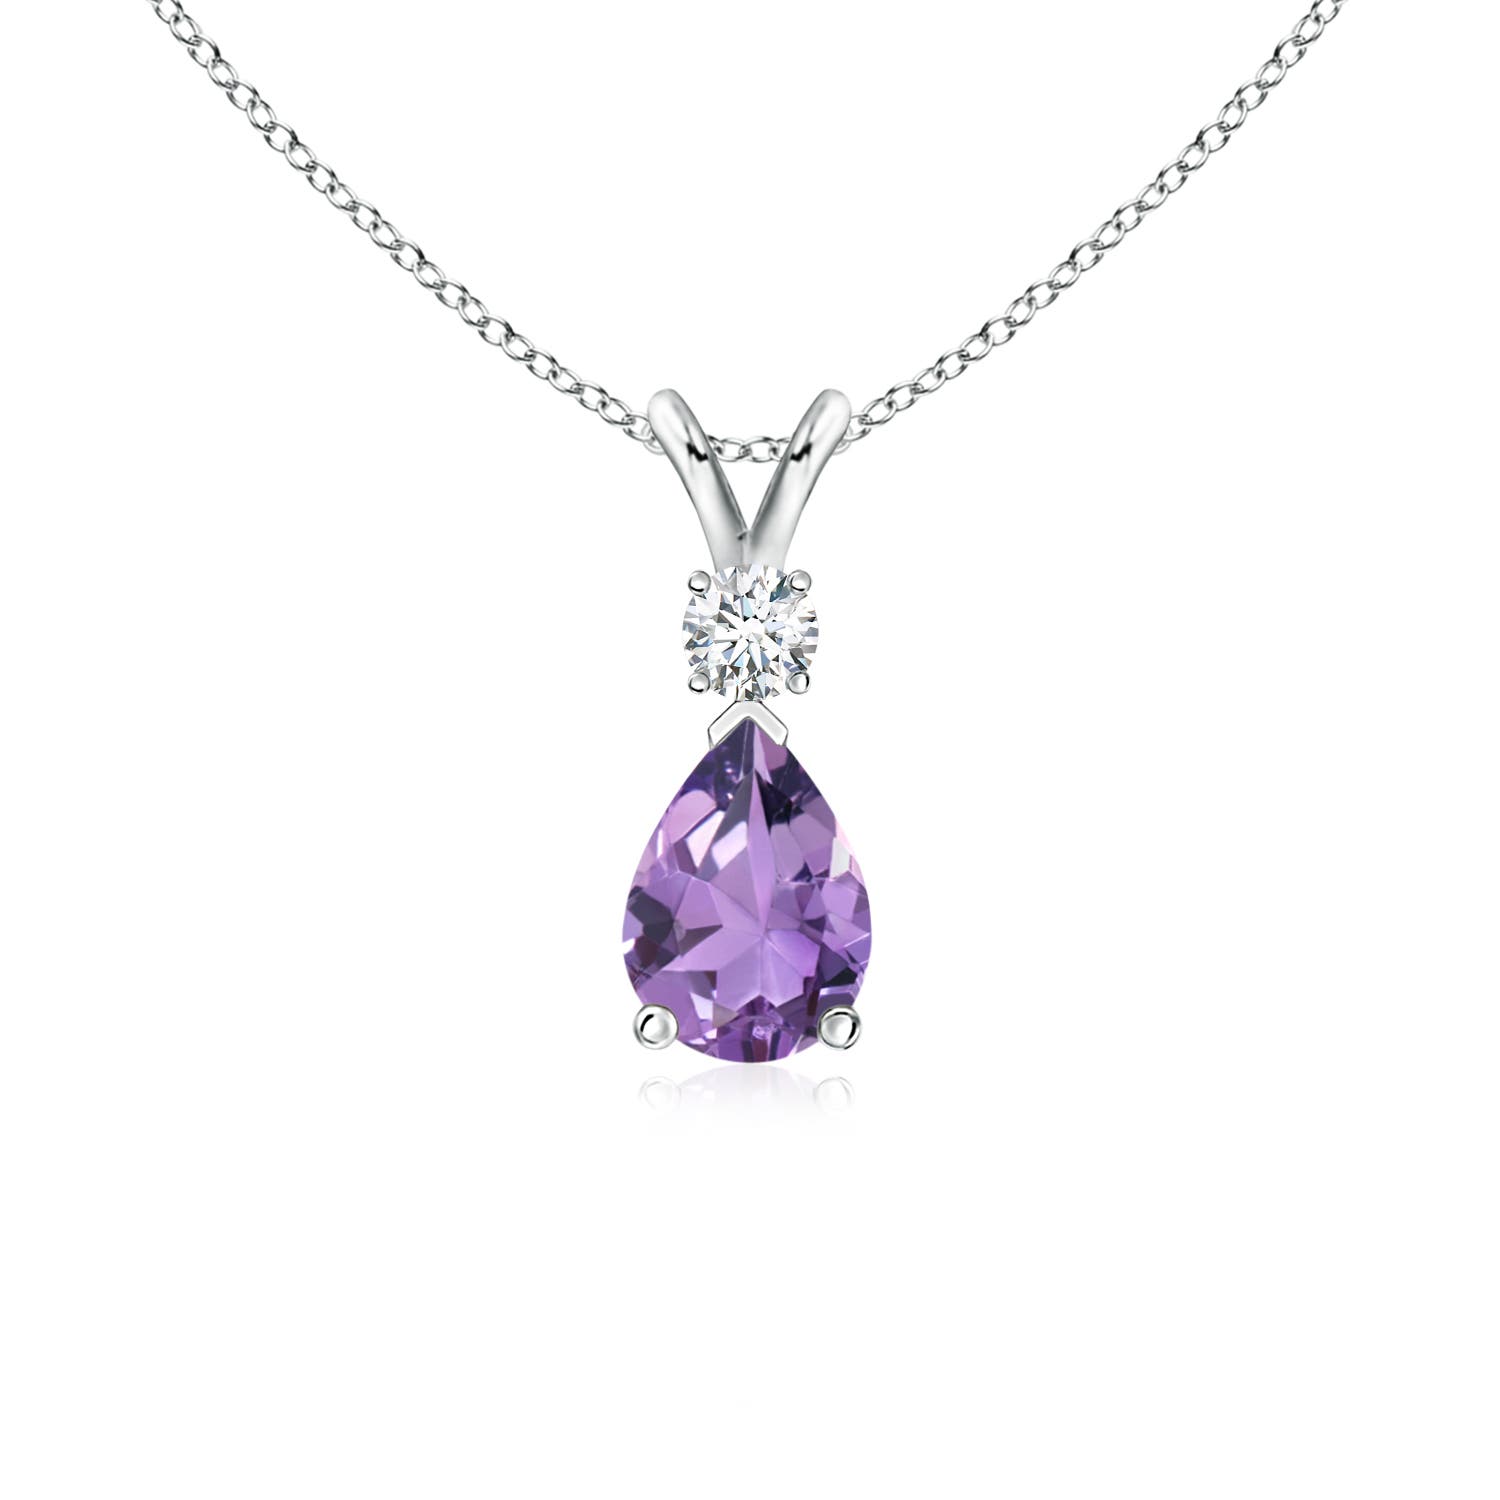 A - Amethyst / 0.67 CT / 14 KT White Gold